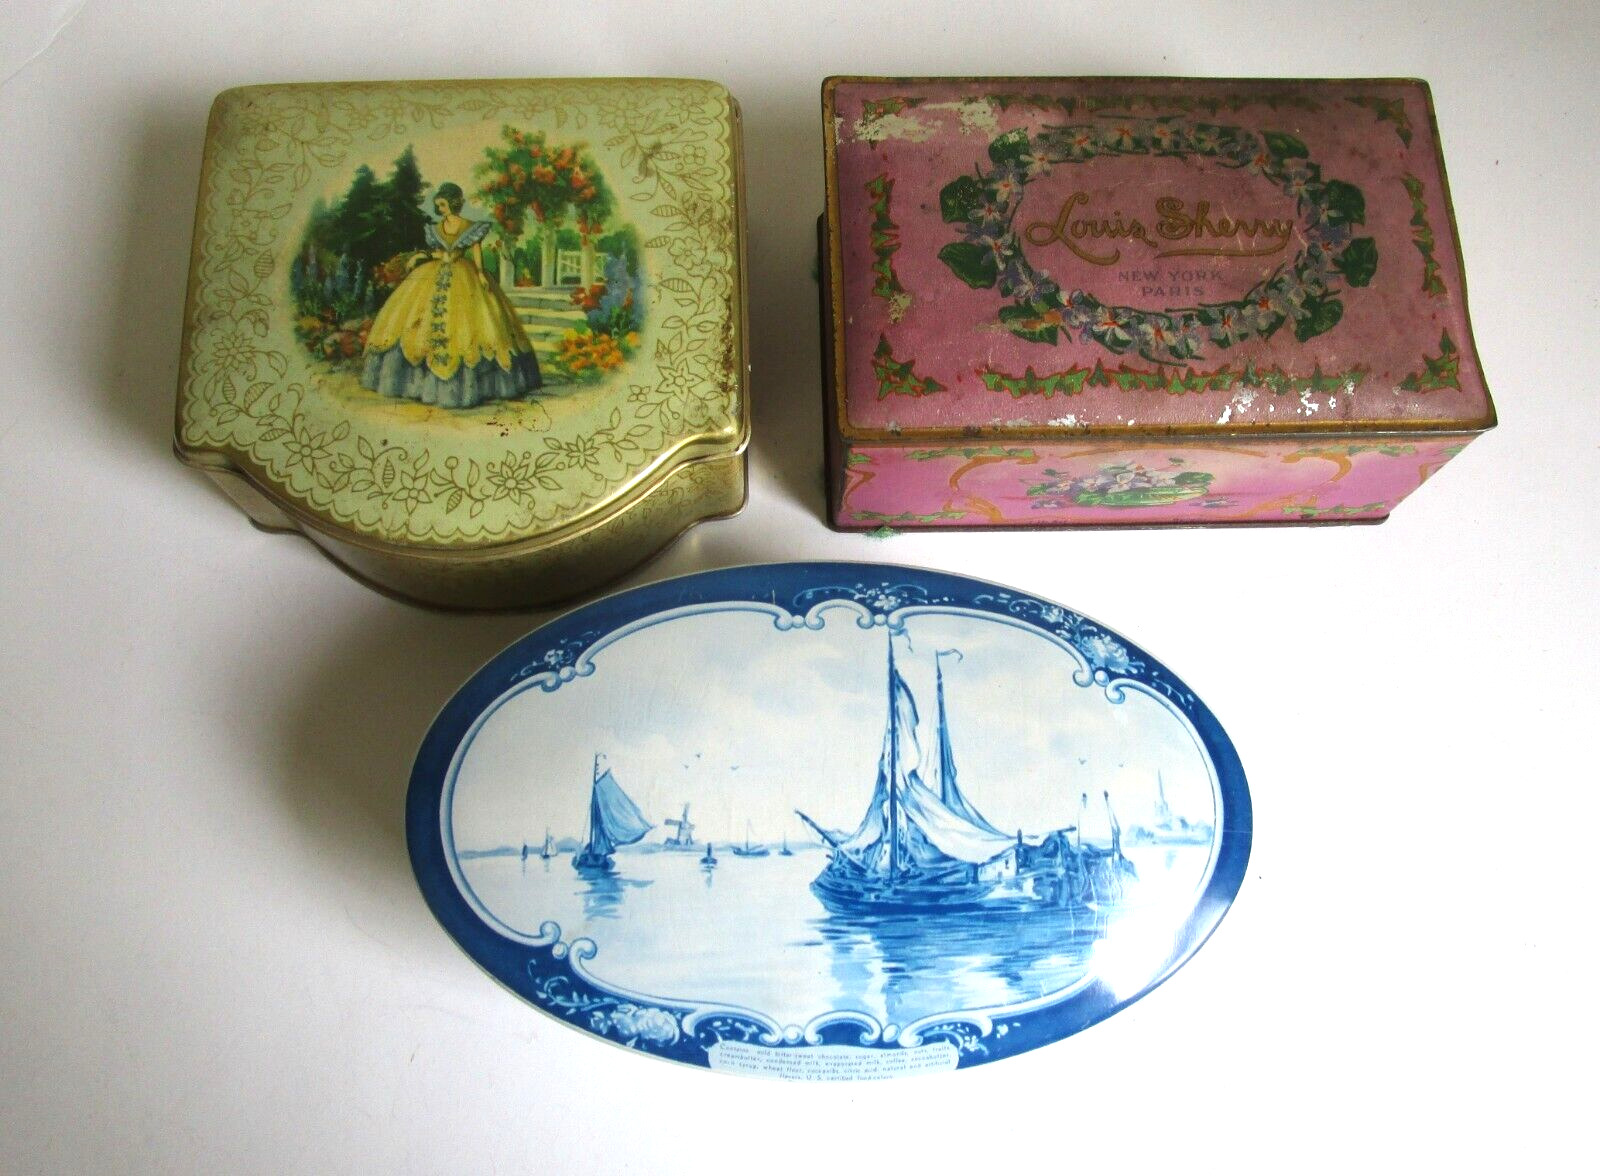 Three Vintage Hinged Candy Tins - Louis Sherry - Droste - #9